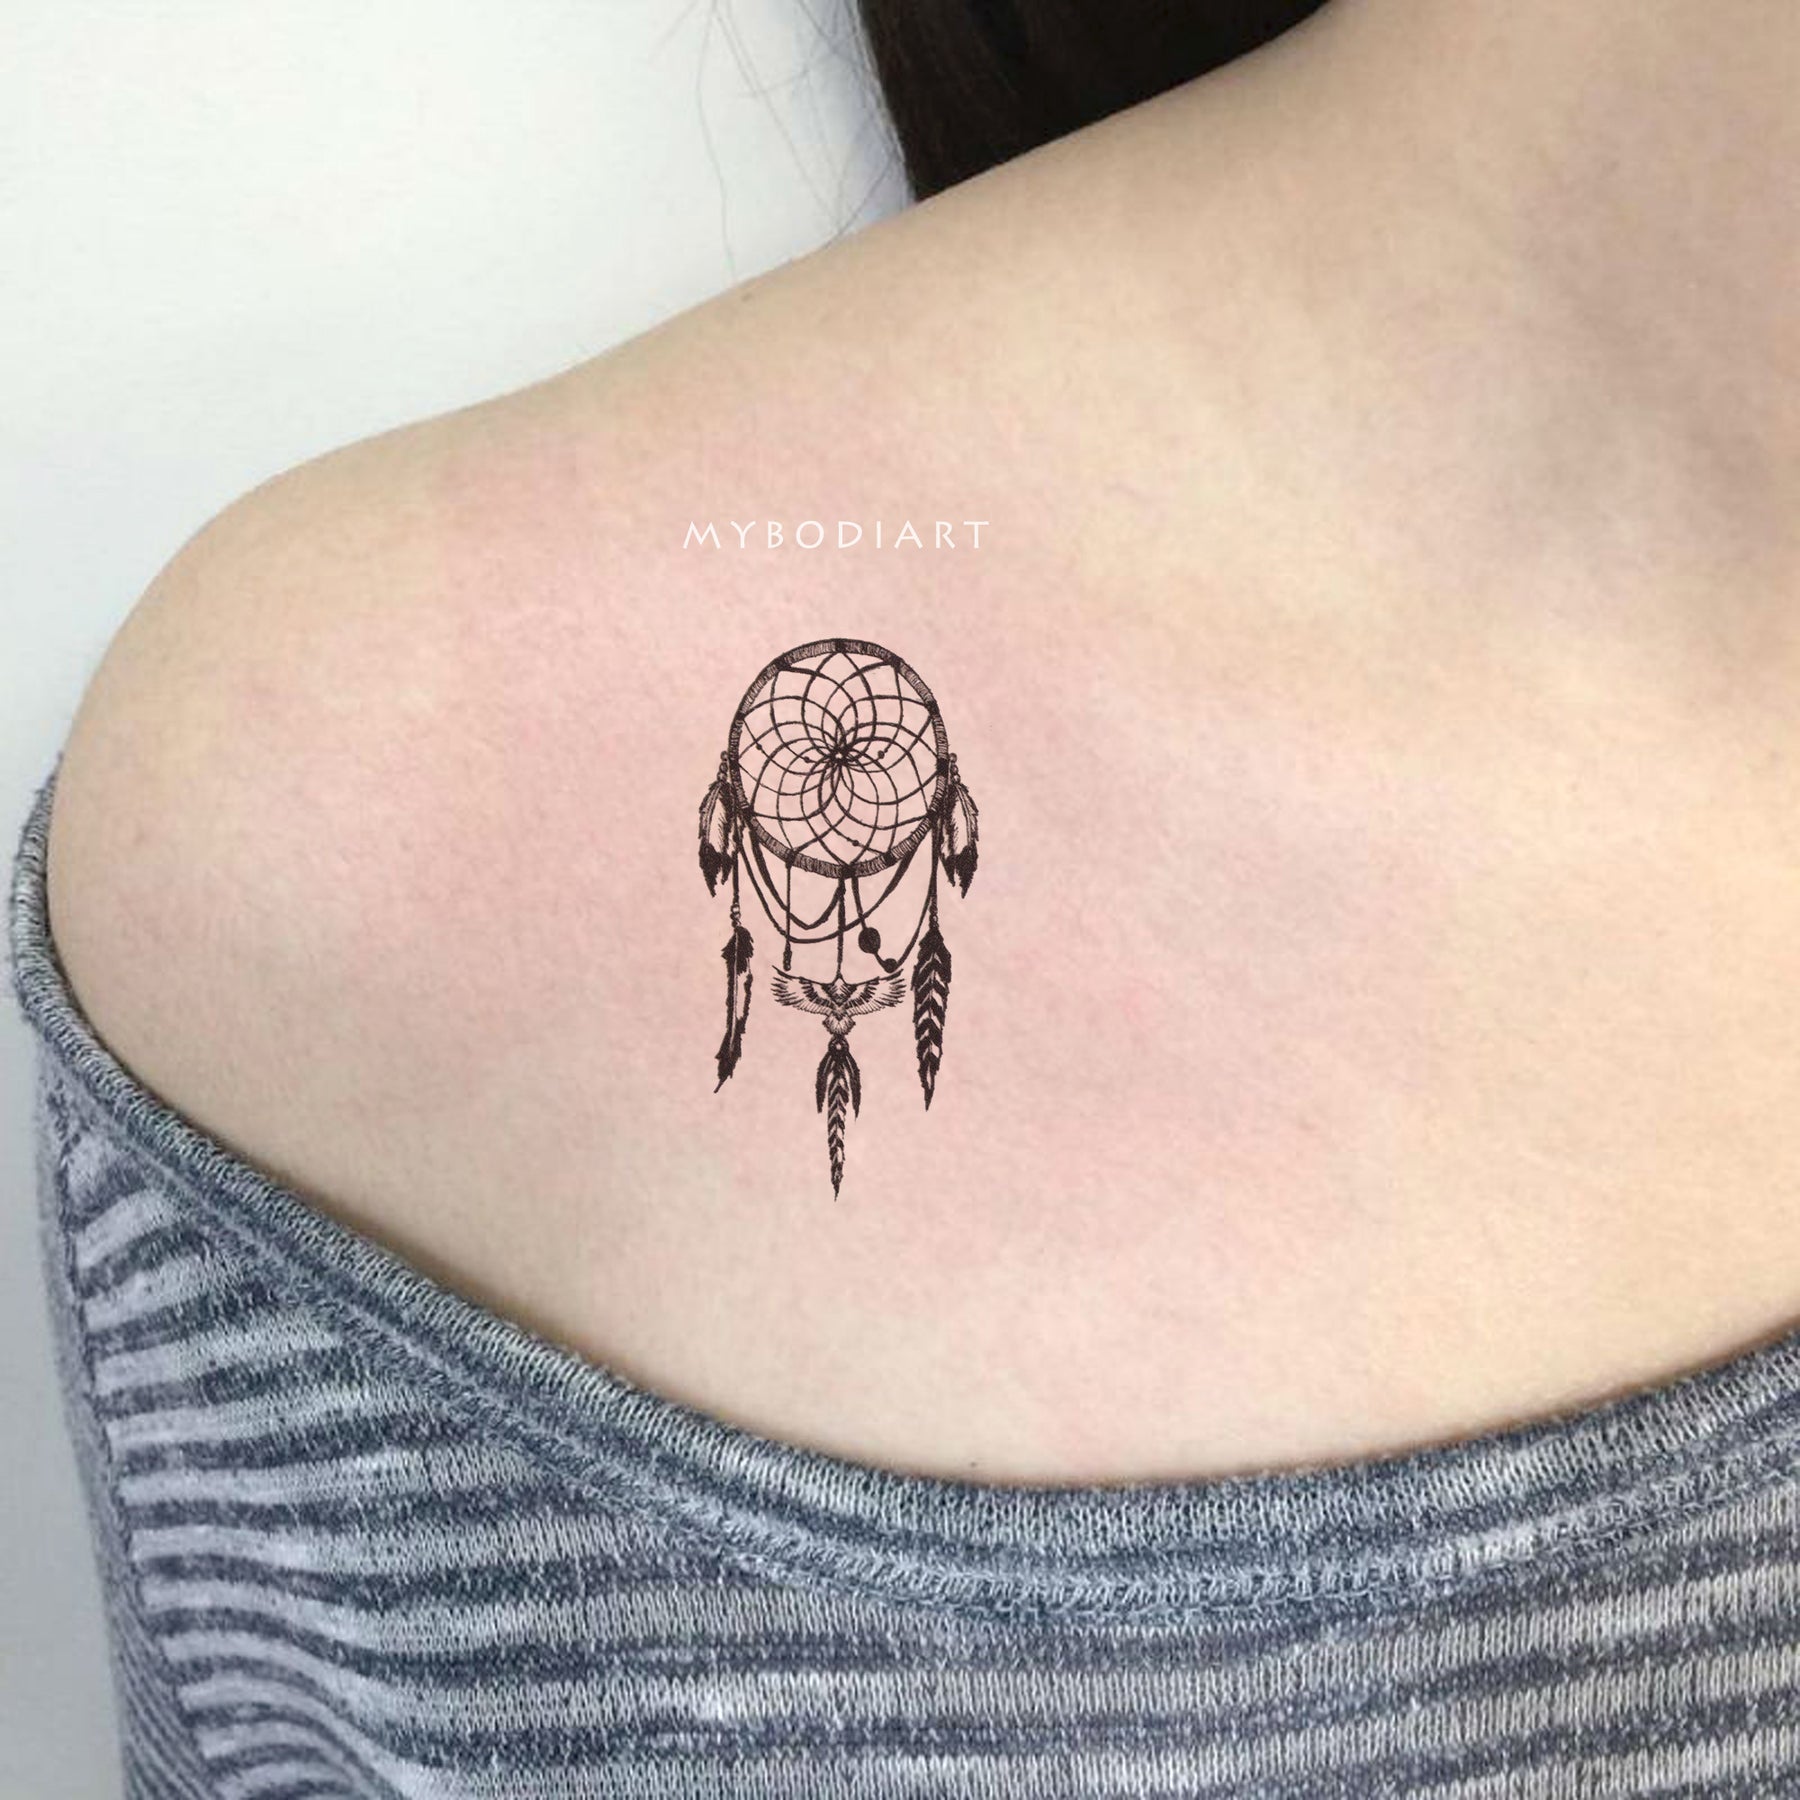 Black and grey dreamcatcher tattoo done on the shoulder